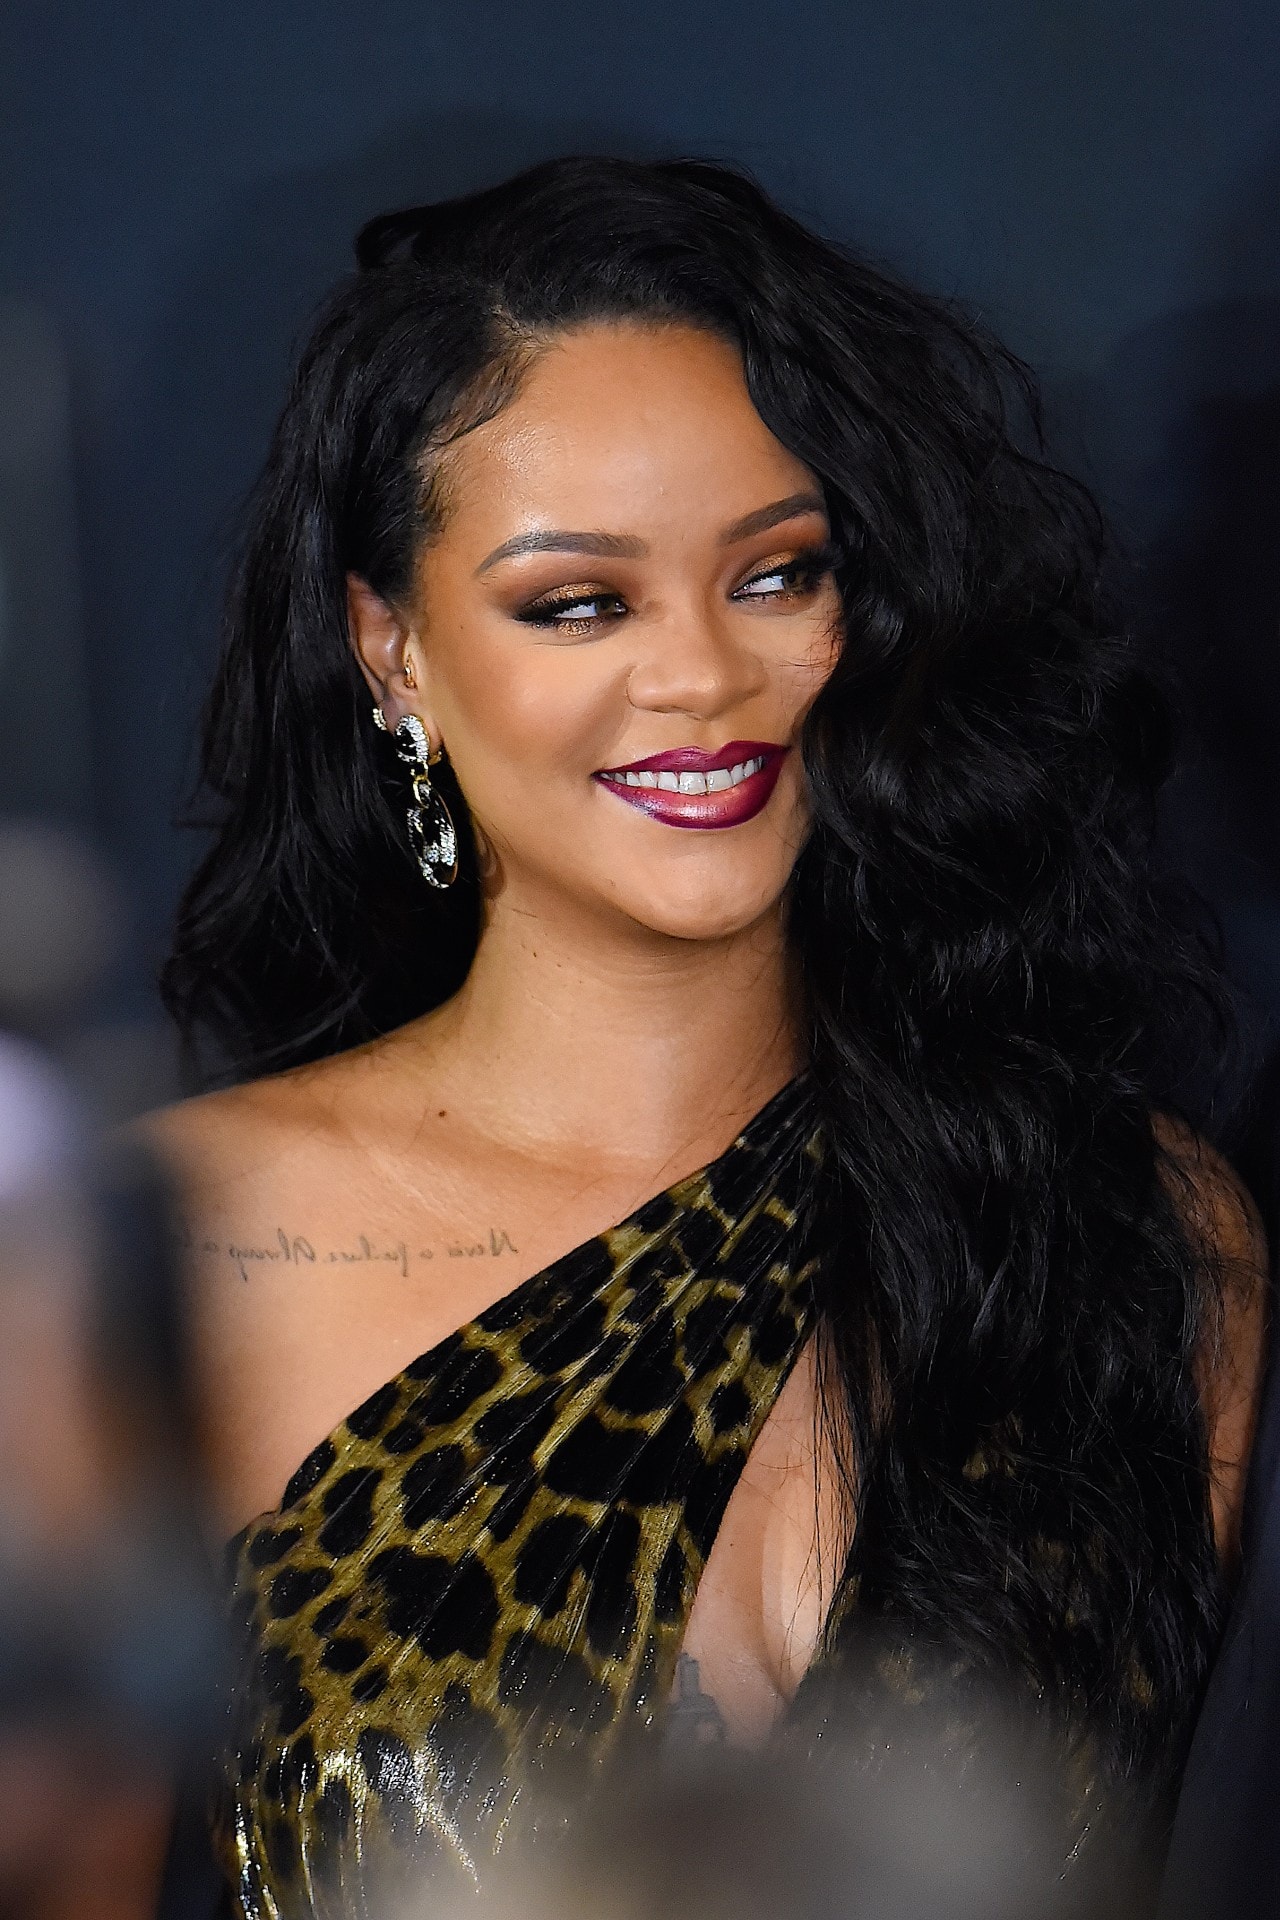 rihanna recorded music songs black panther: wakanda forever 2 sequel end-credits track film marvel 